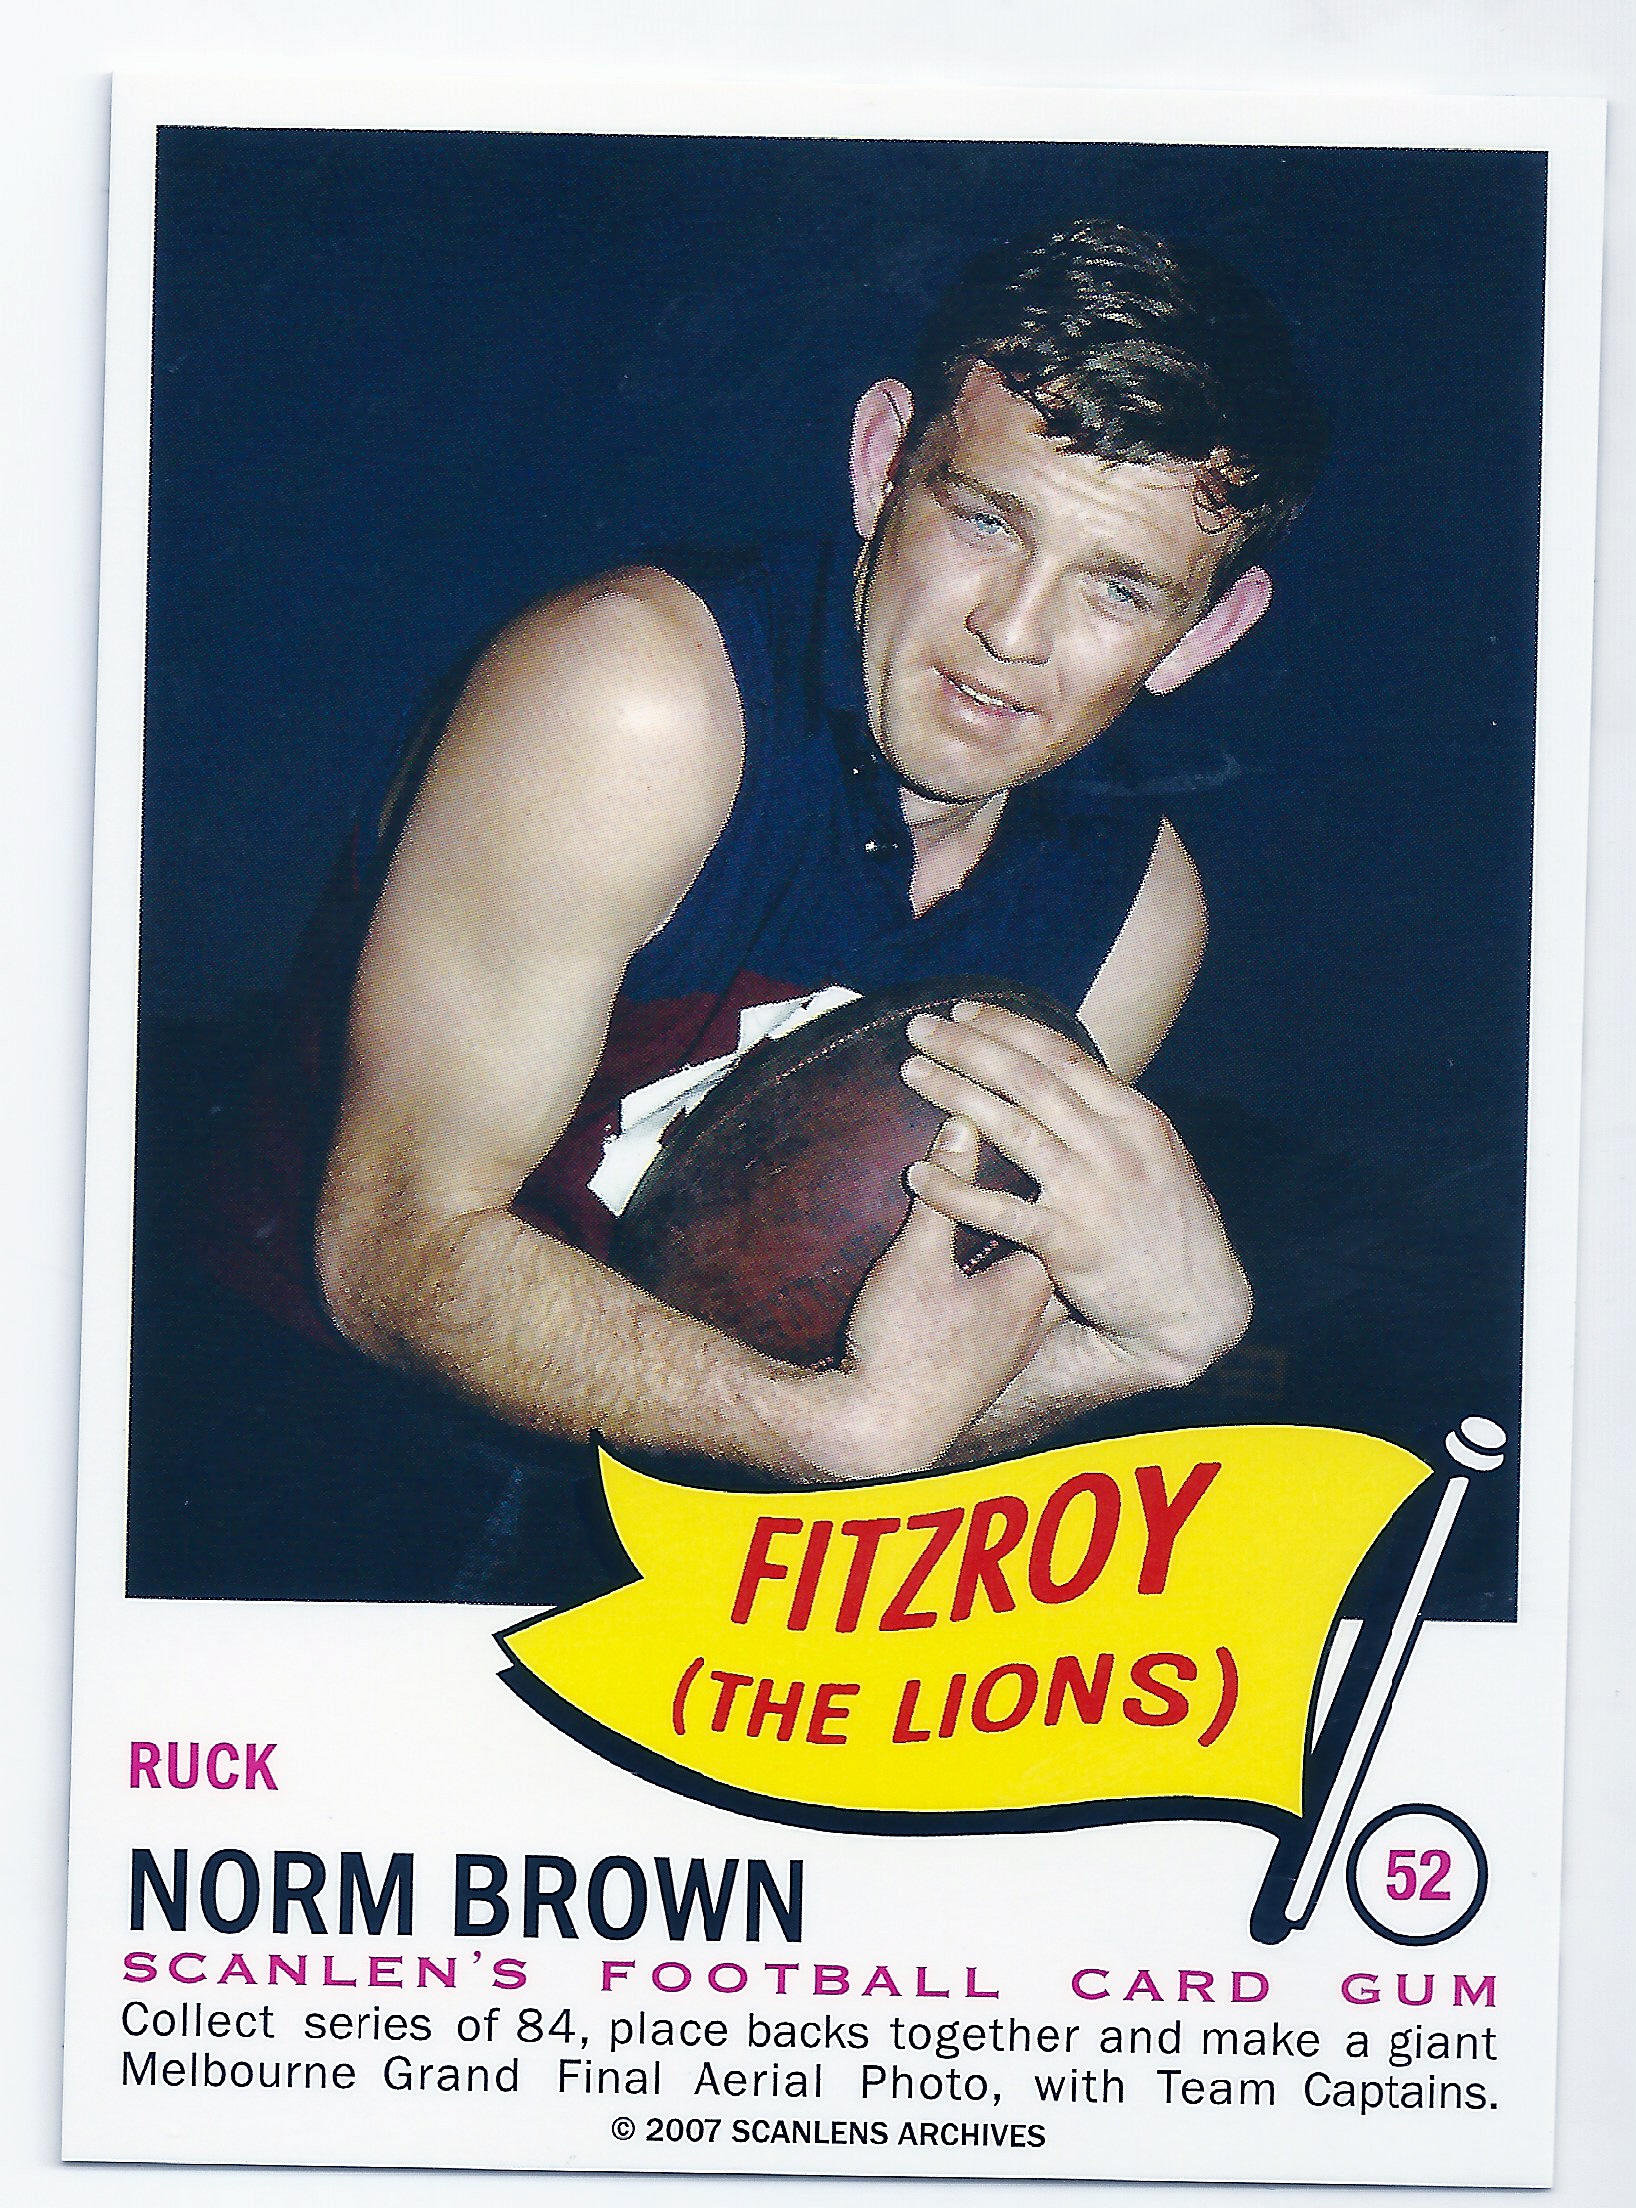 2007 – 1966 Scanlens Flag Archives (52) Norm Brown Fitzroy